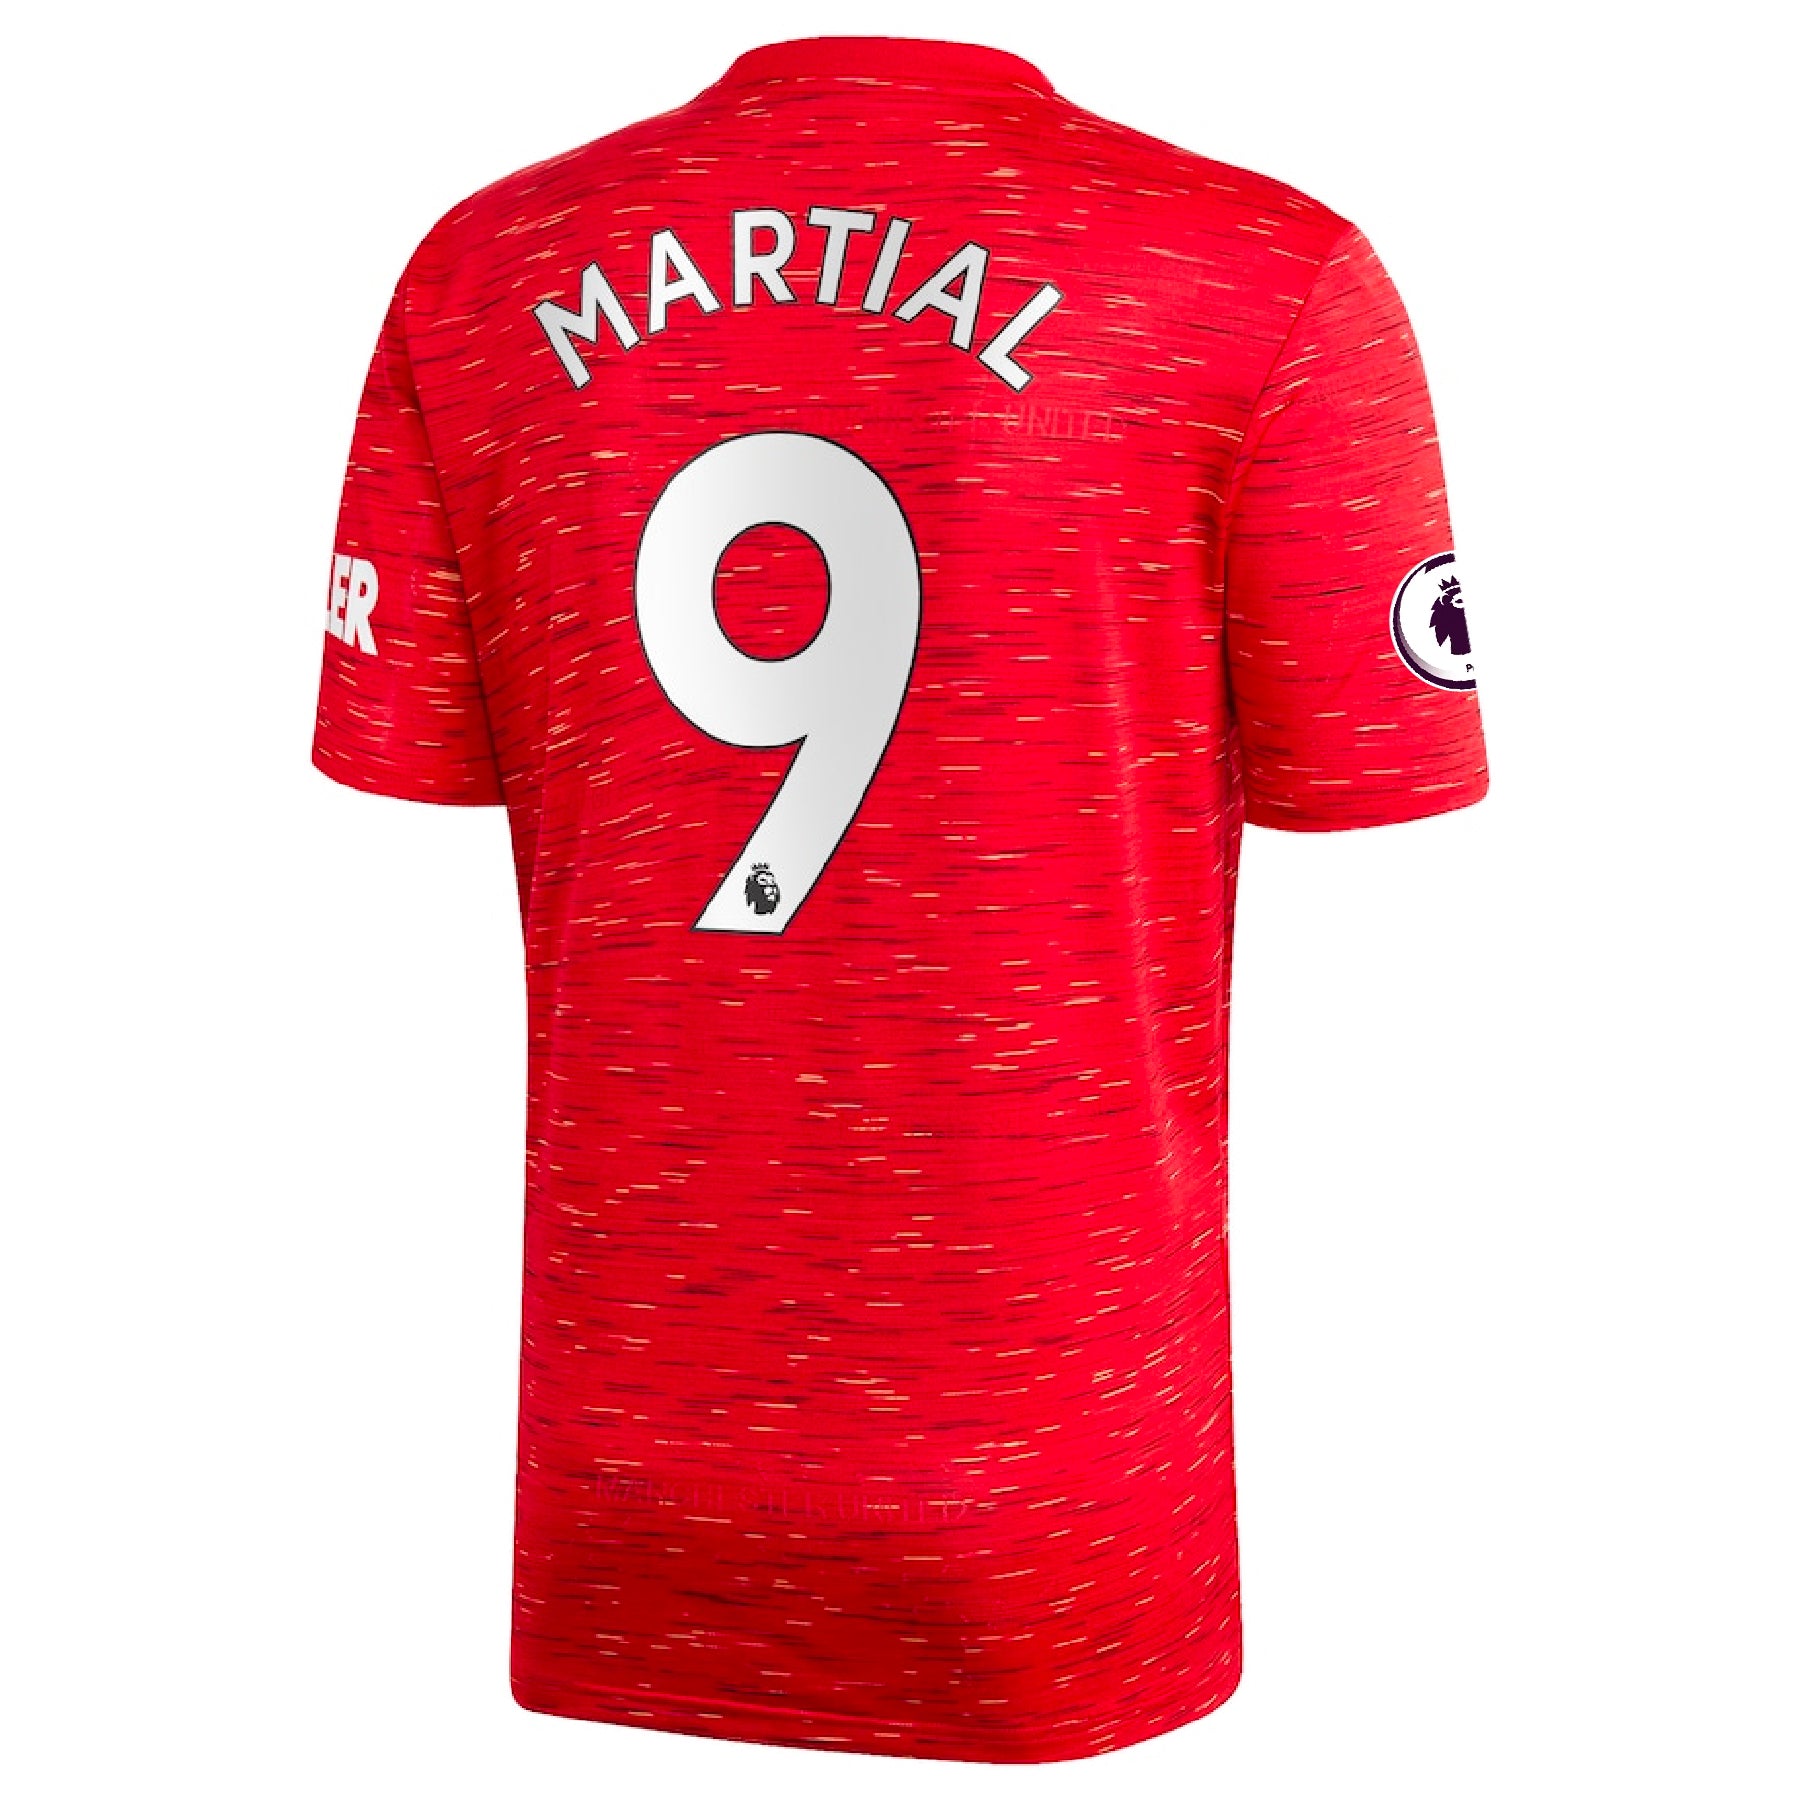 anthony martial jersey number